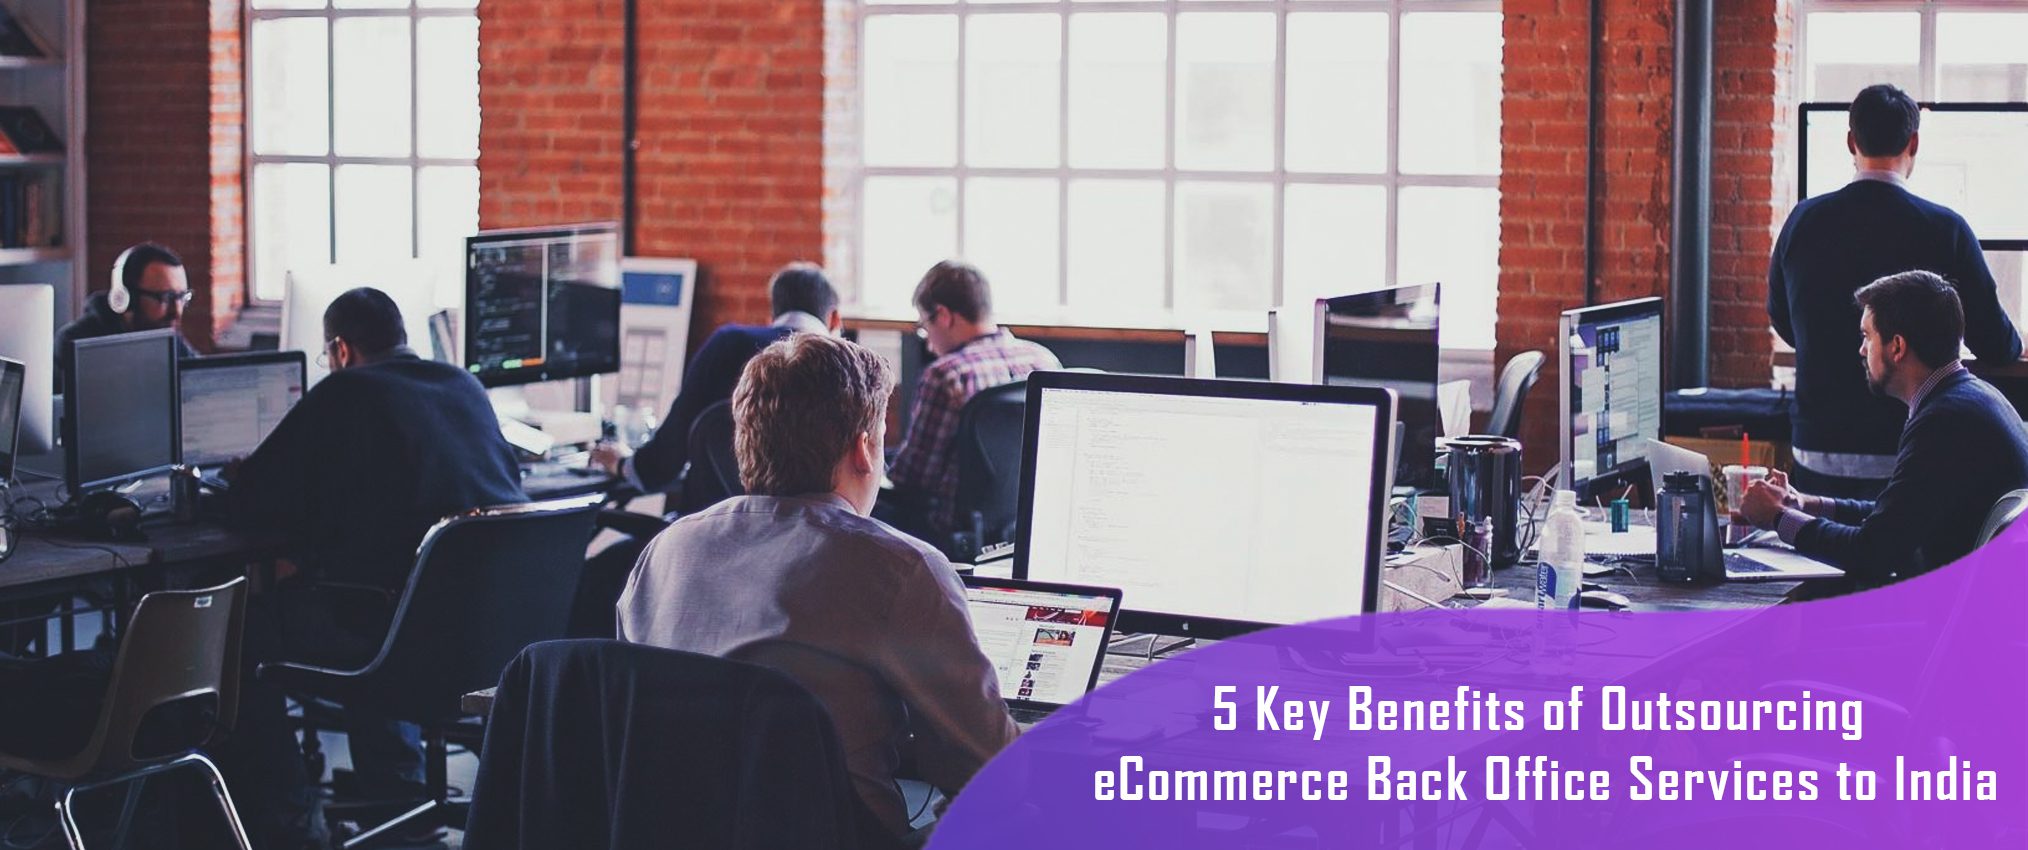 5 reasons for outsourcing eCommerce back office services to India